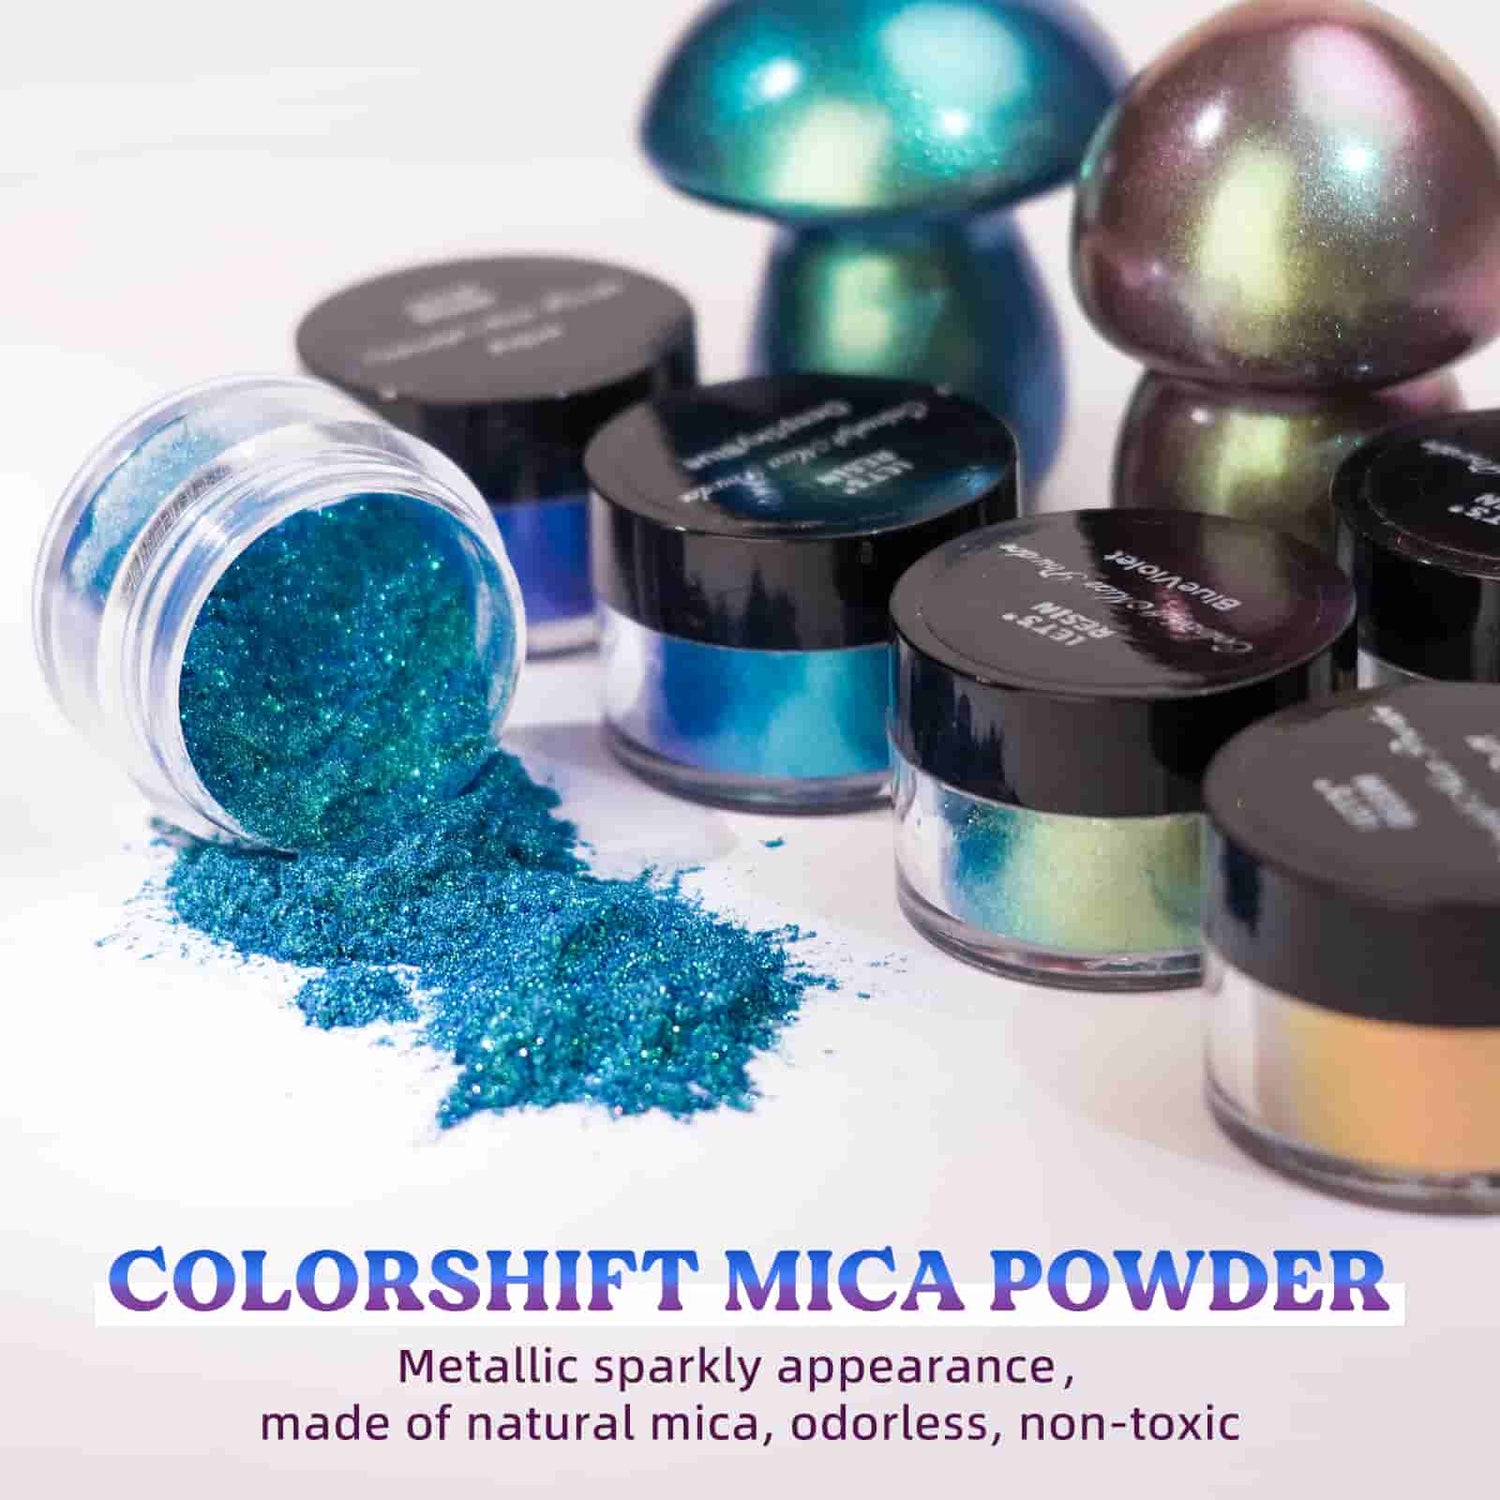 Let's Resin 36 Colors Mica Powder, Mica Pigment Powder for Epoxy Resin/UV Resin, Natural Colorant Dye for Soap/Candle Making, Li